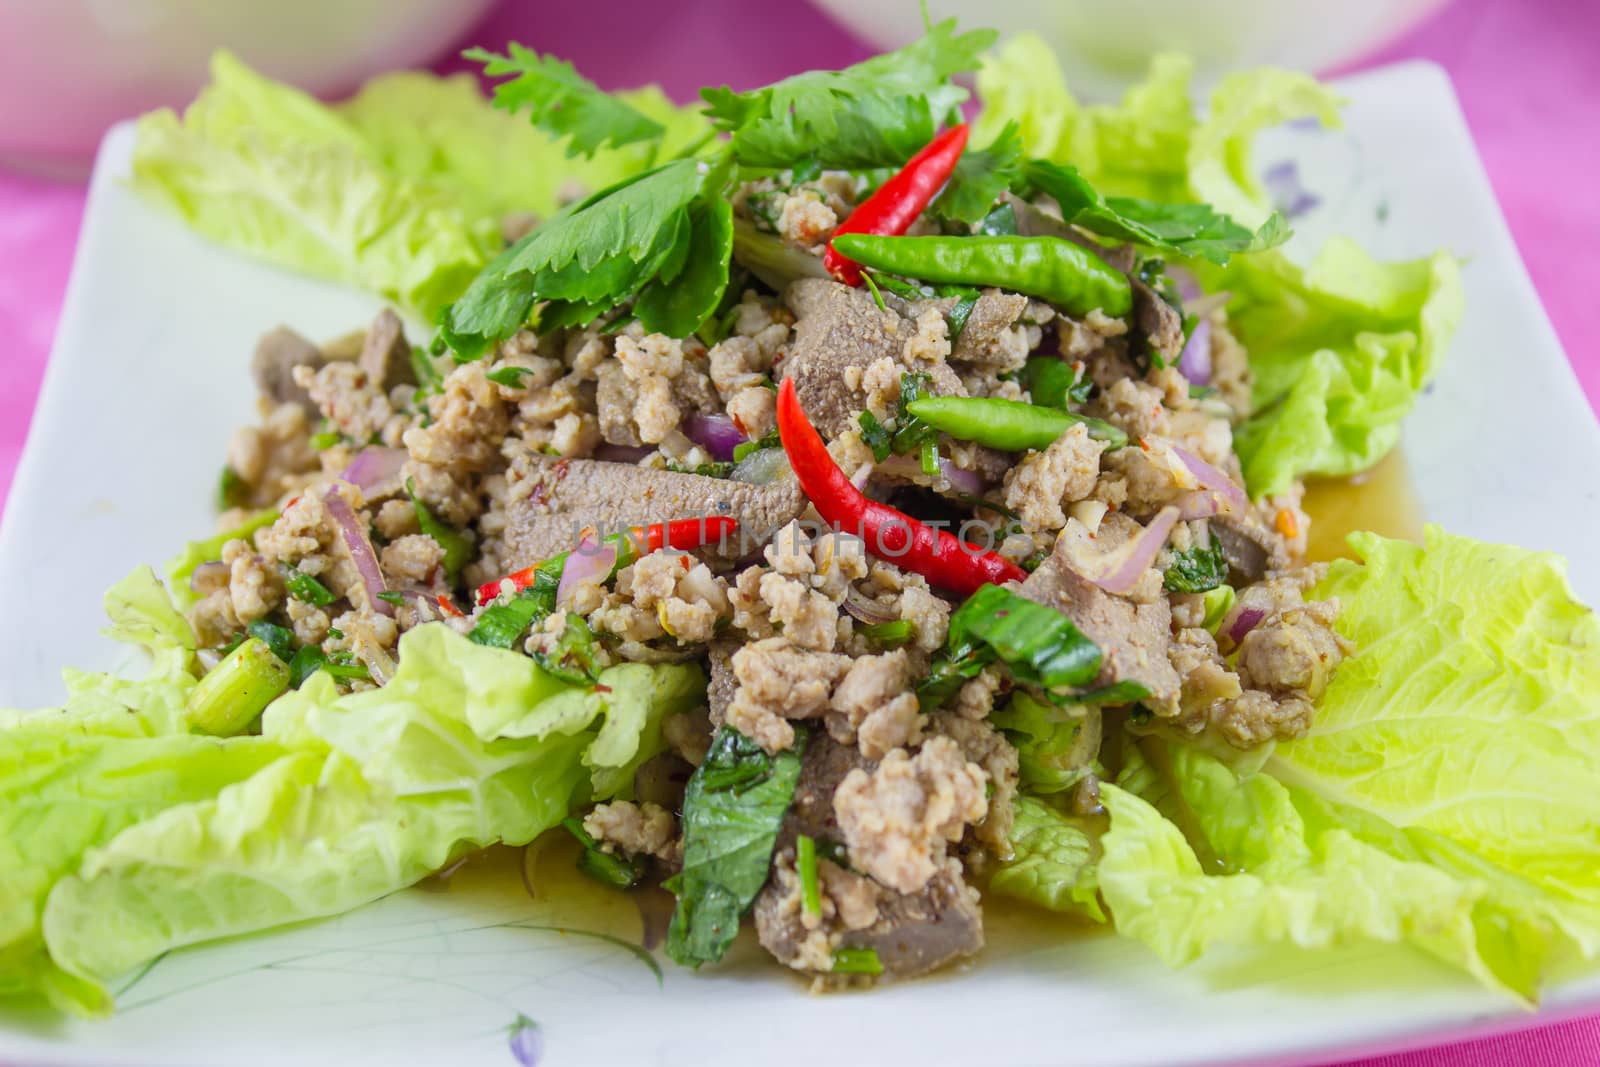 Cuisine Larb Moo Spicy Minced Pork Salad by photo2life